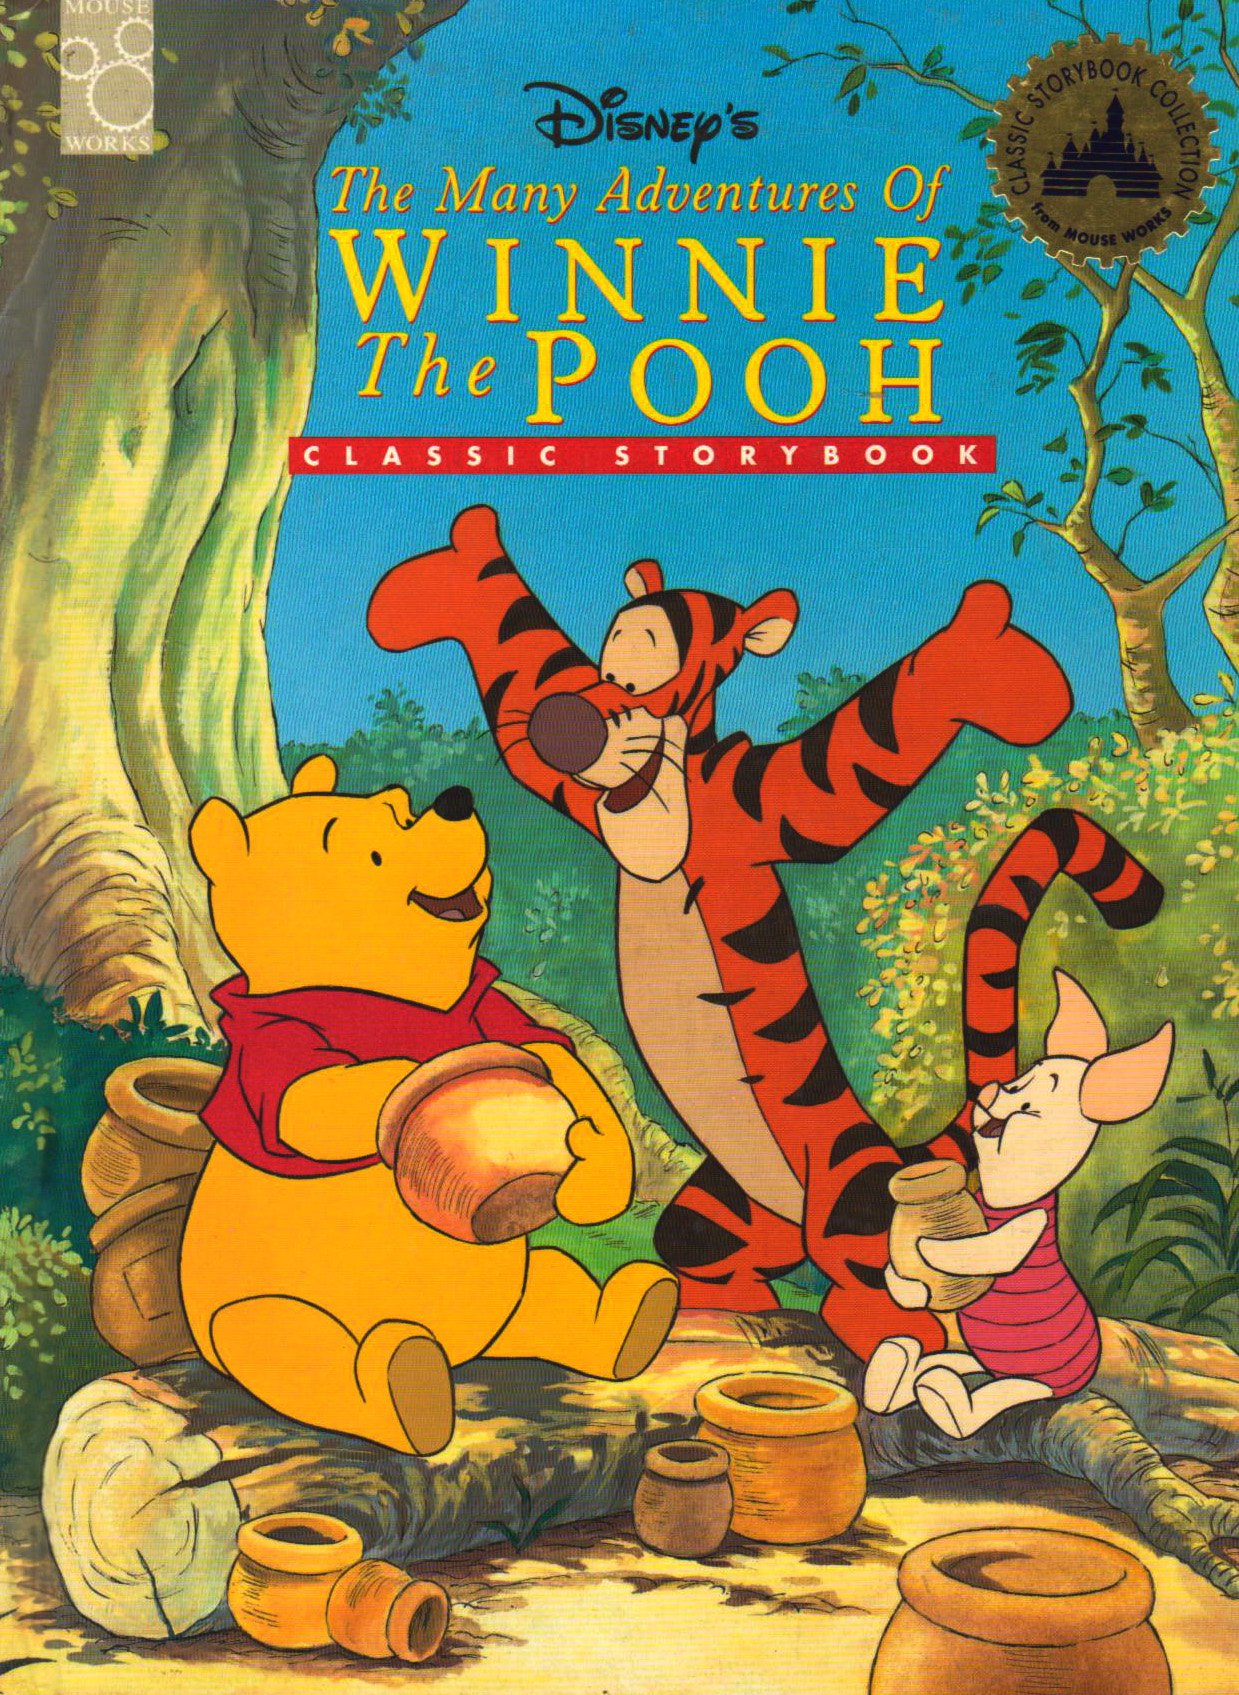 The Many Adventures Of Winnie The Pooh #3